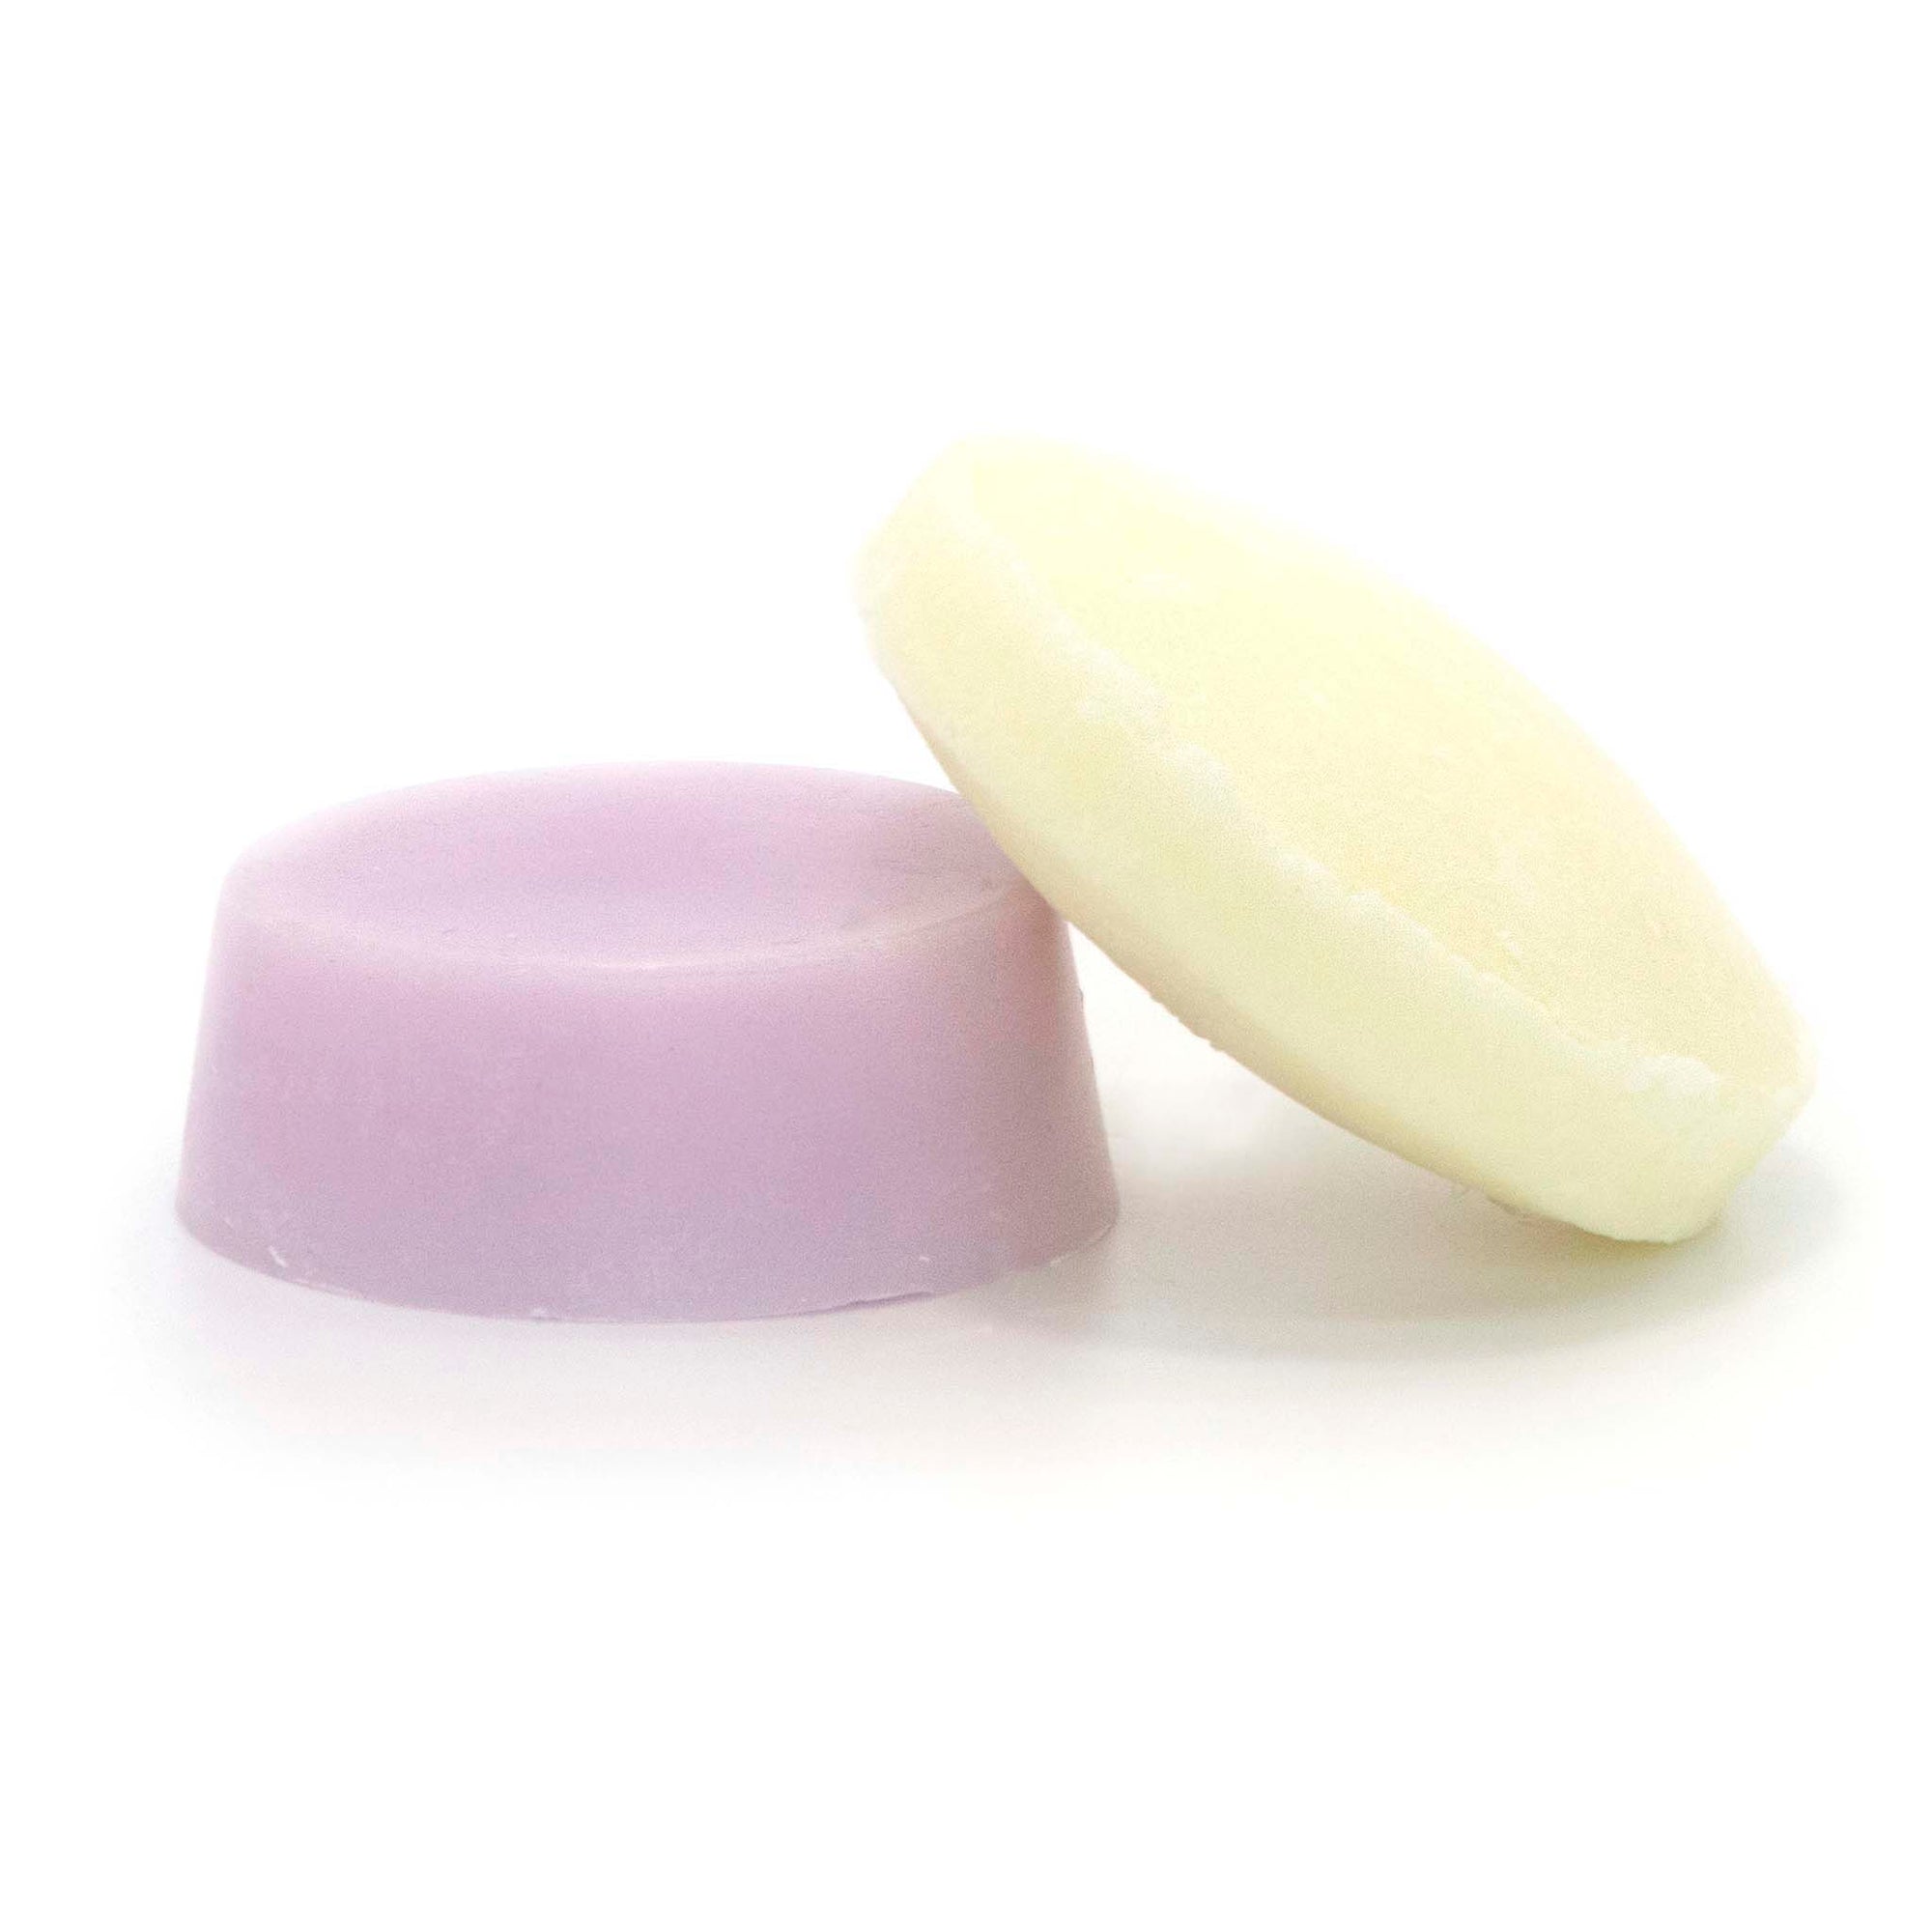 bee you shampoo and conditioner bars